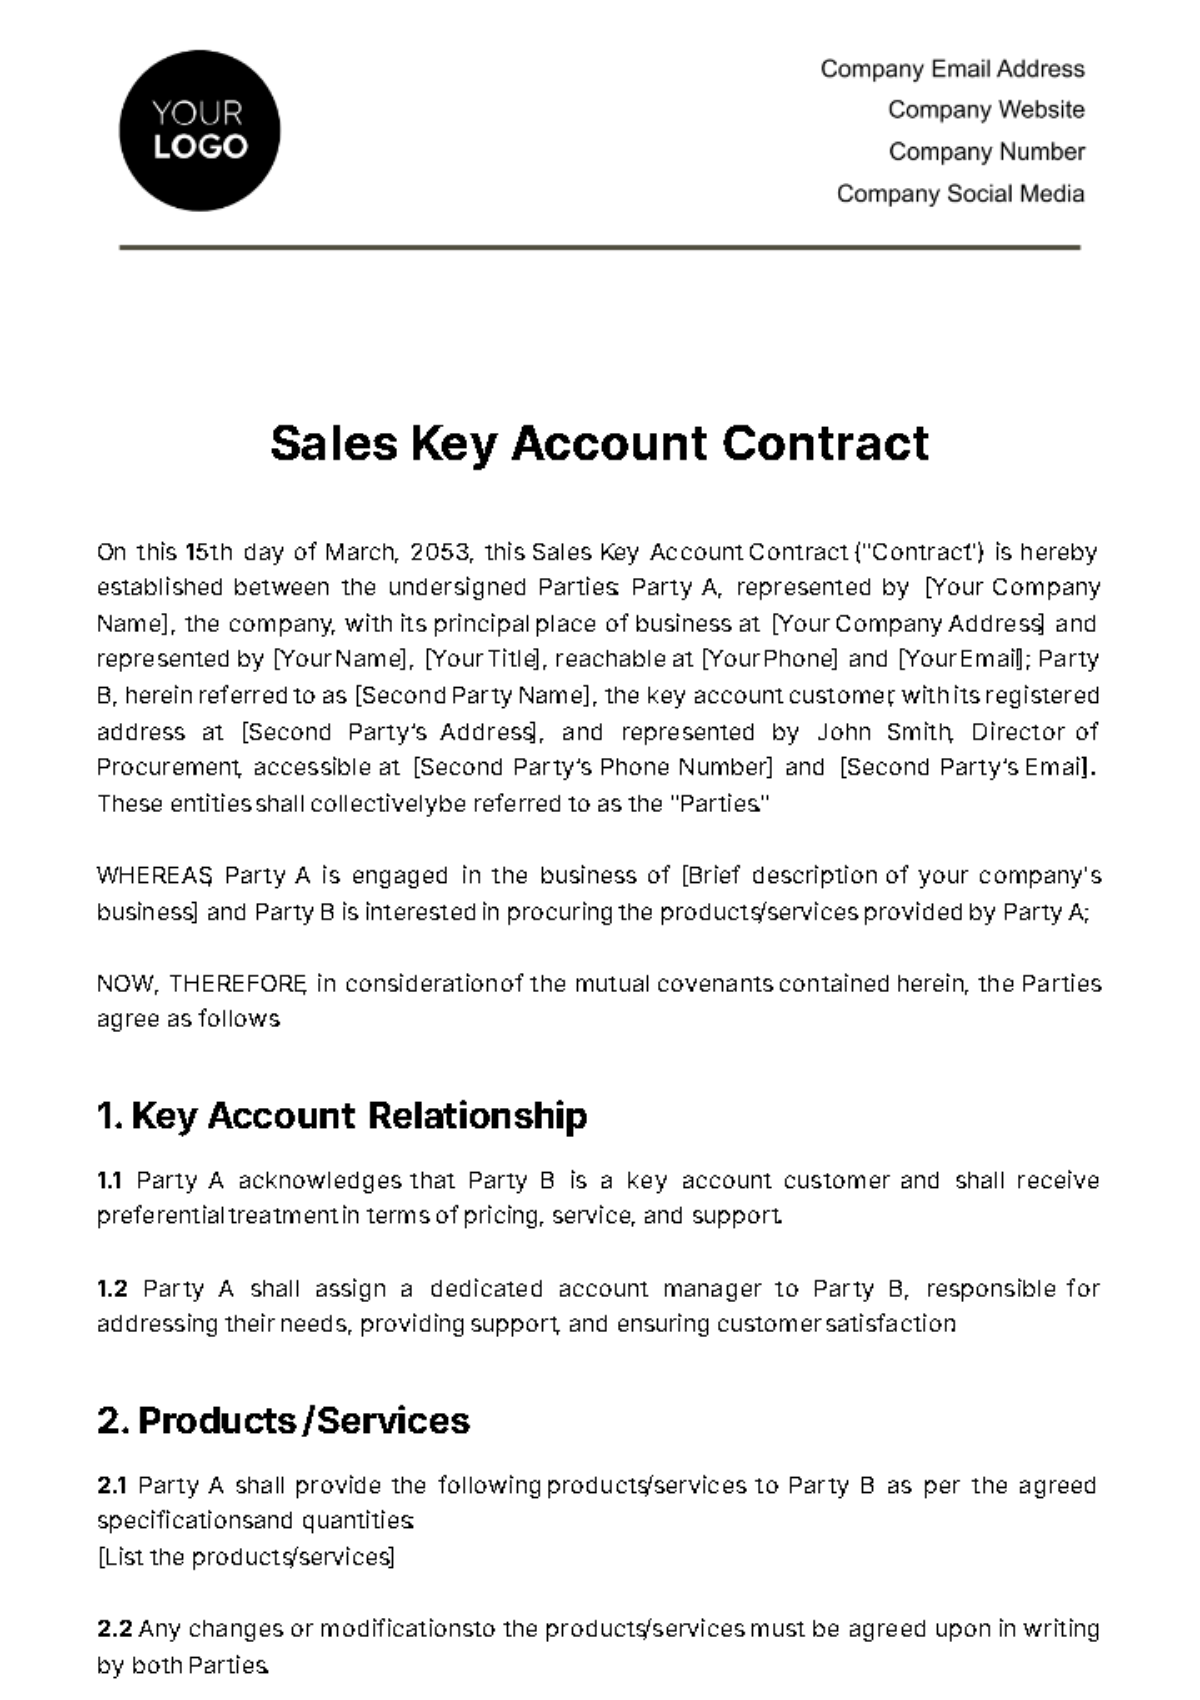 Free Sales Key Account Contract Template